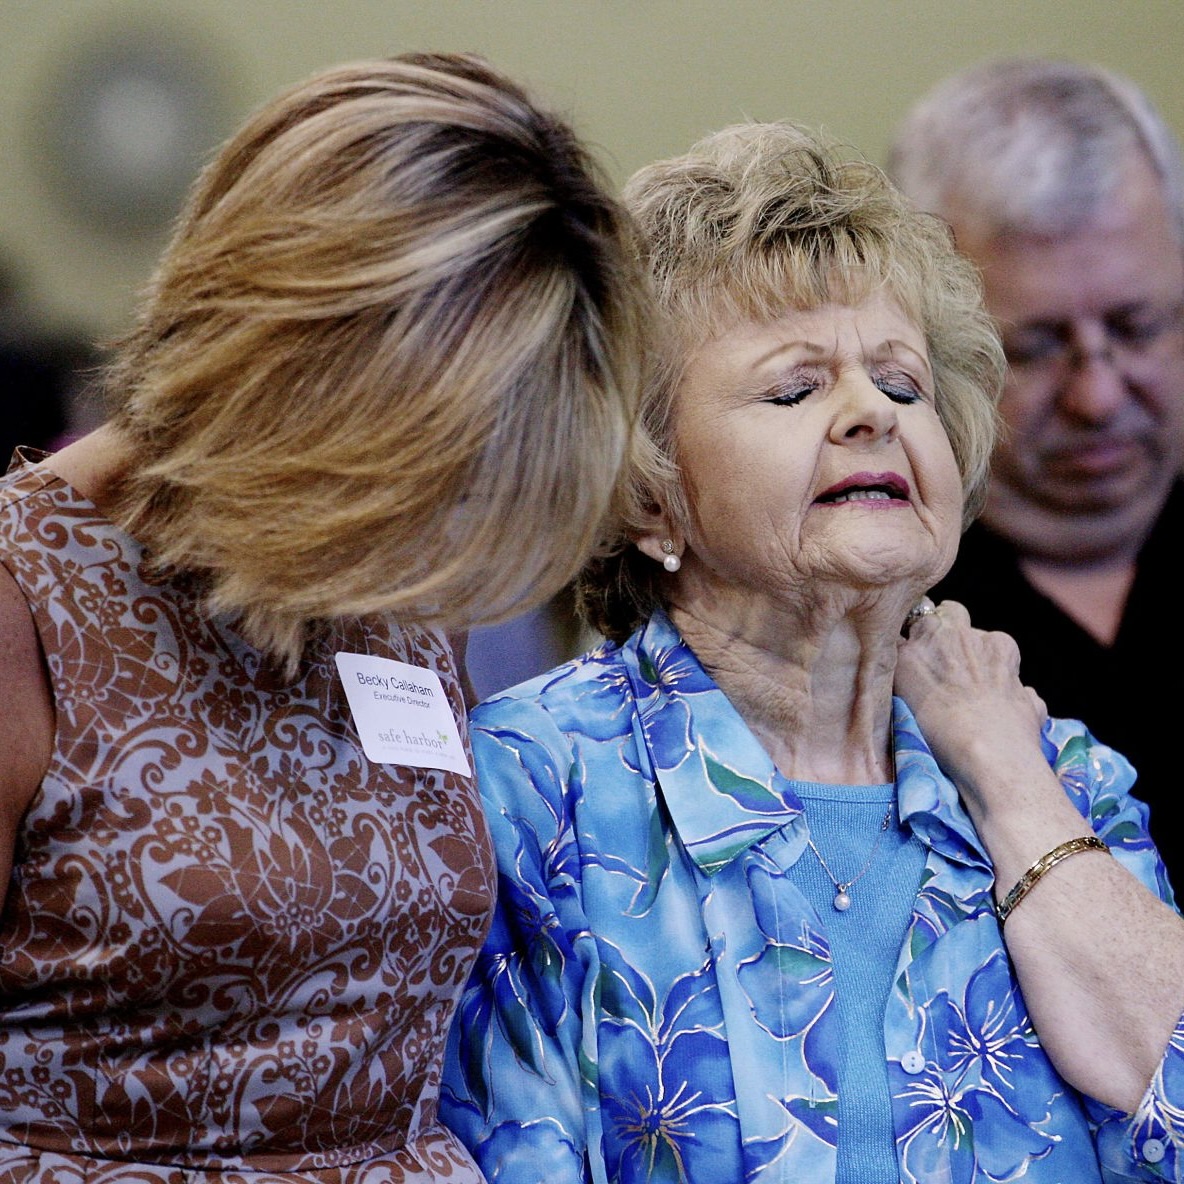 Jenna Henson Black (right) is overcome with emotion and is comforted by Safe Harbor Executive Director Becky Callaham during the opening of the new Oconee County women’s shelter. Black has been raising money for the shelter since 2004 after she fled her abusive husband of 18 years. Grace Beahm/Staff ¬